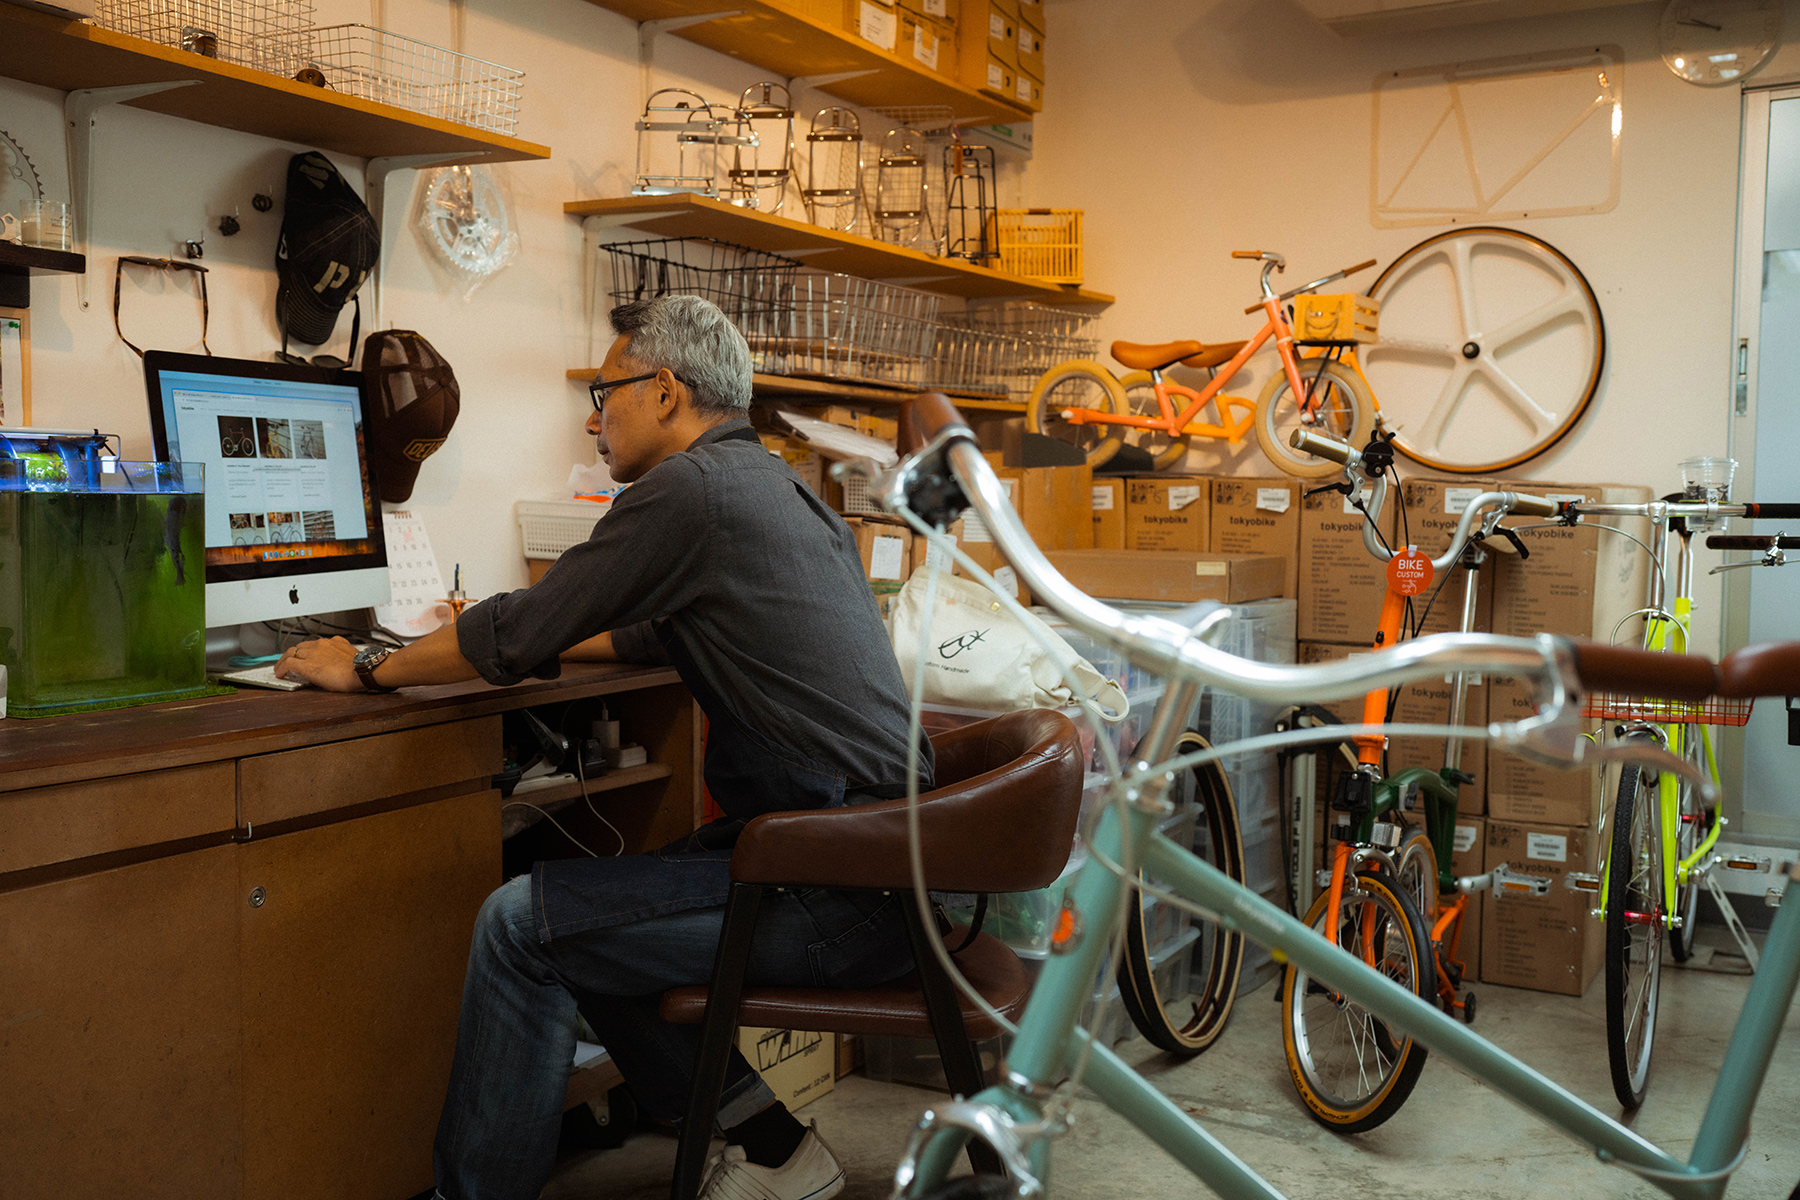 An entrepreneur in a workshop with bikes. He is working on a laptop.